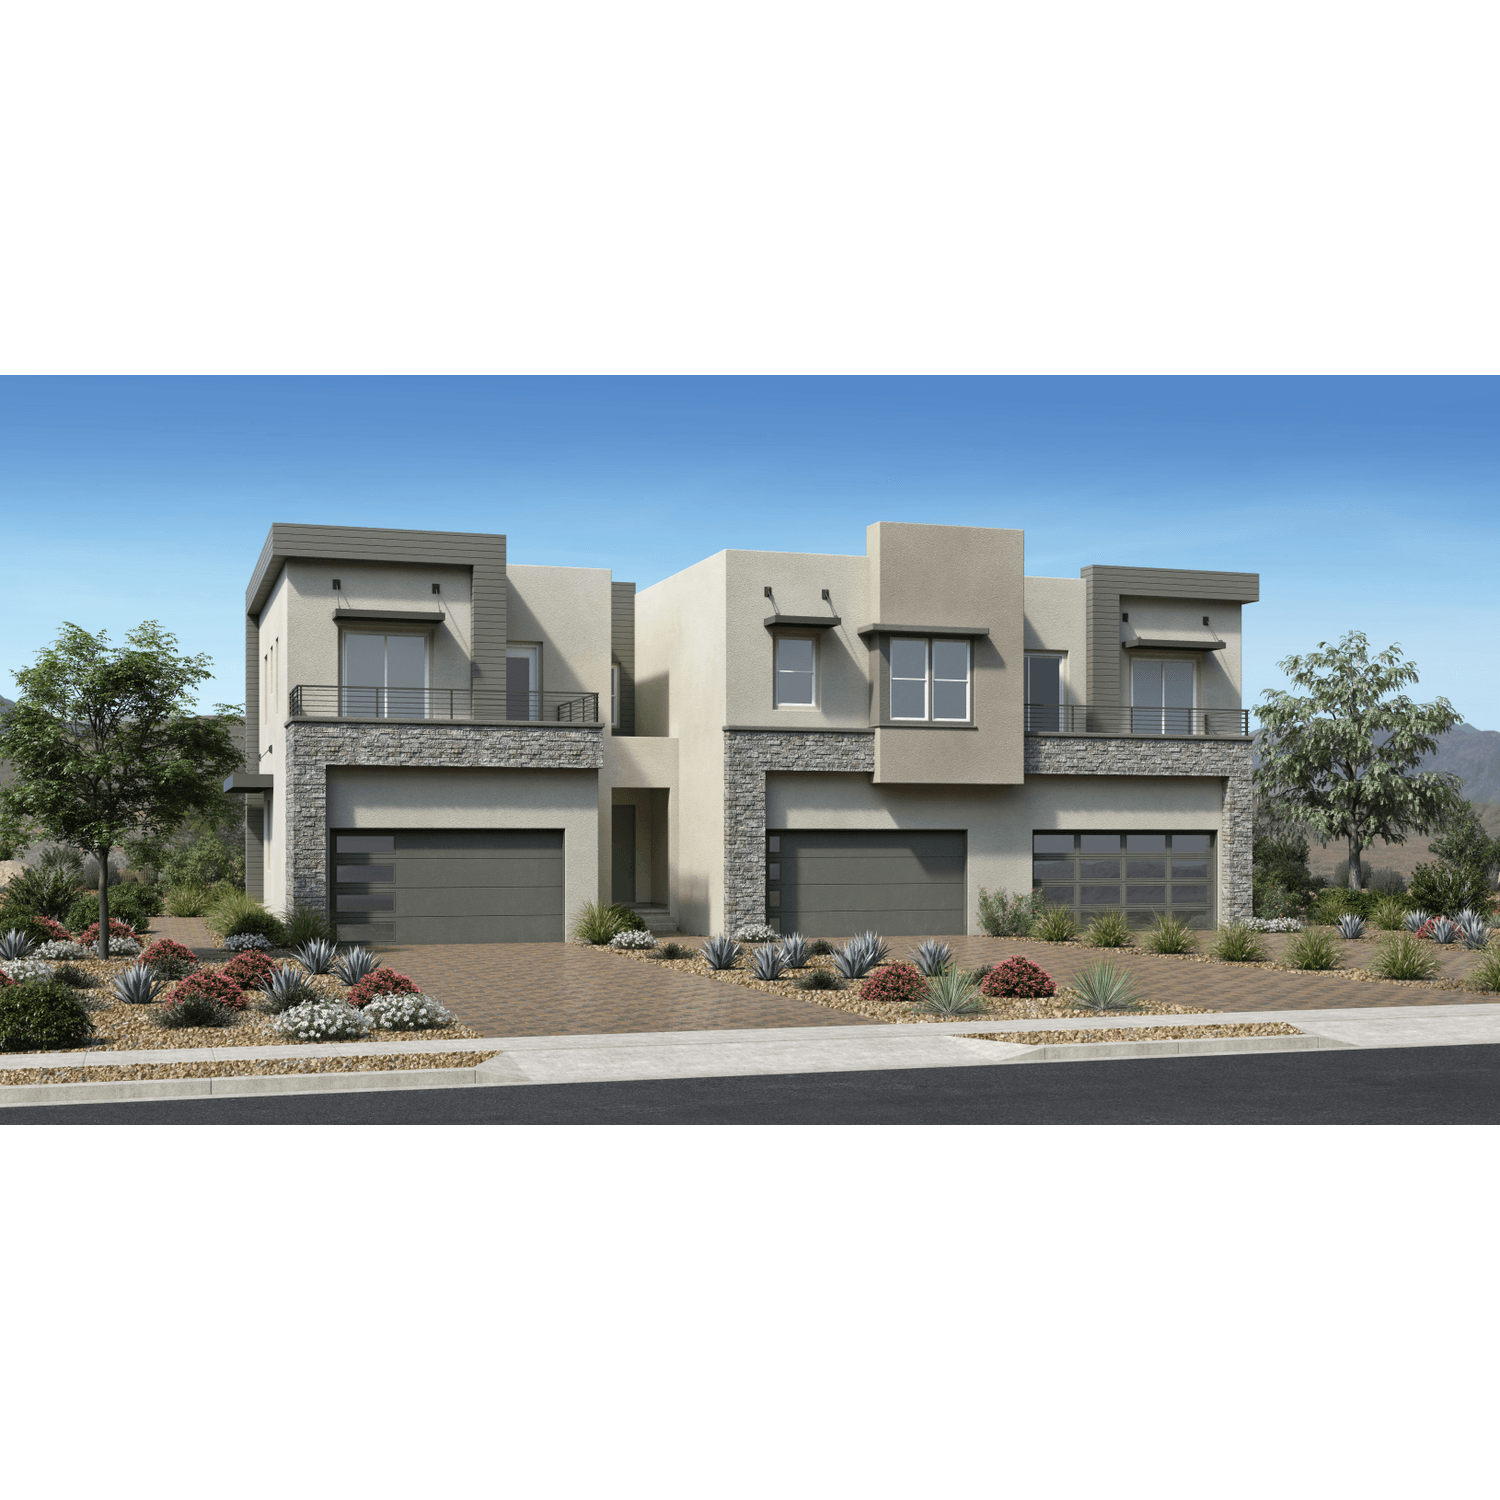 Hilltop by Toll Brothers xây dựng tại Plumas St At Golf Club Dr, Reno, NV 89509